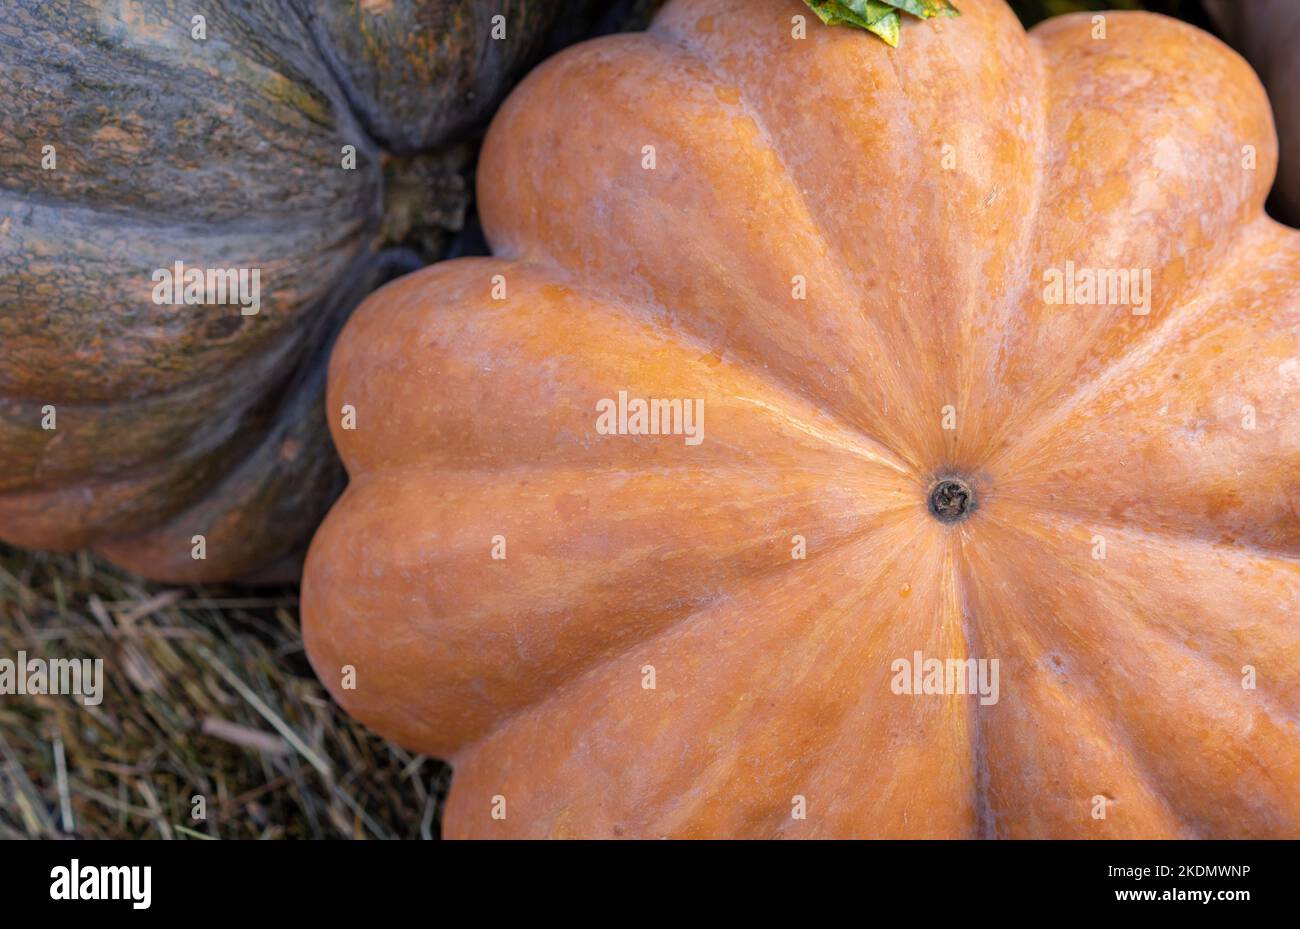 Muscat pumpkin or Muscat de Provence on straw. Autumn harvest of pumpkins on the farm. Stock Photo